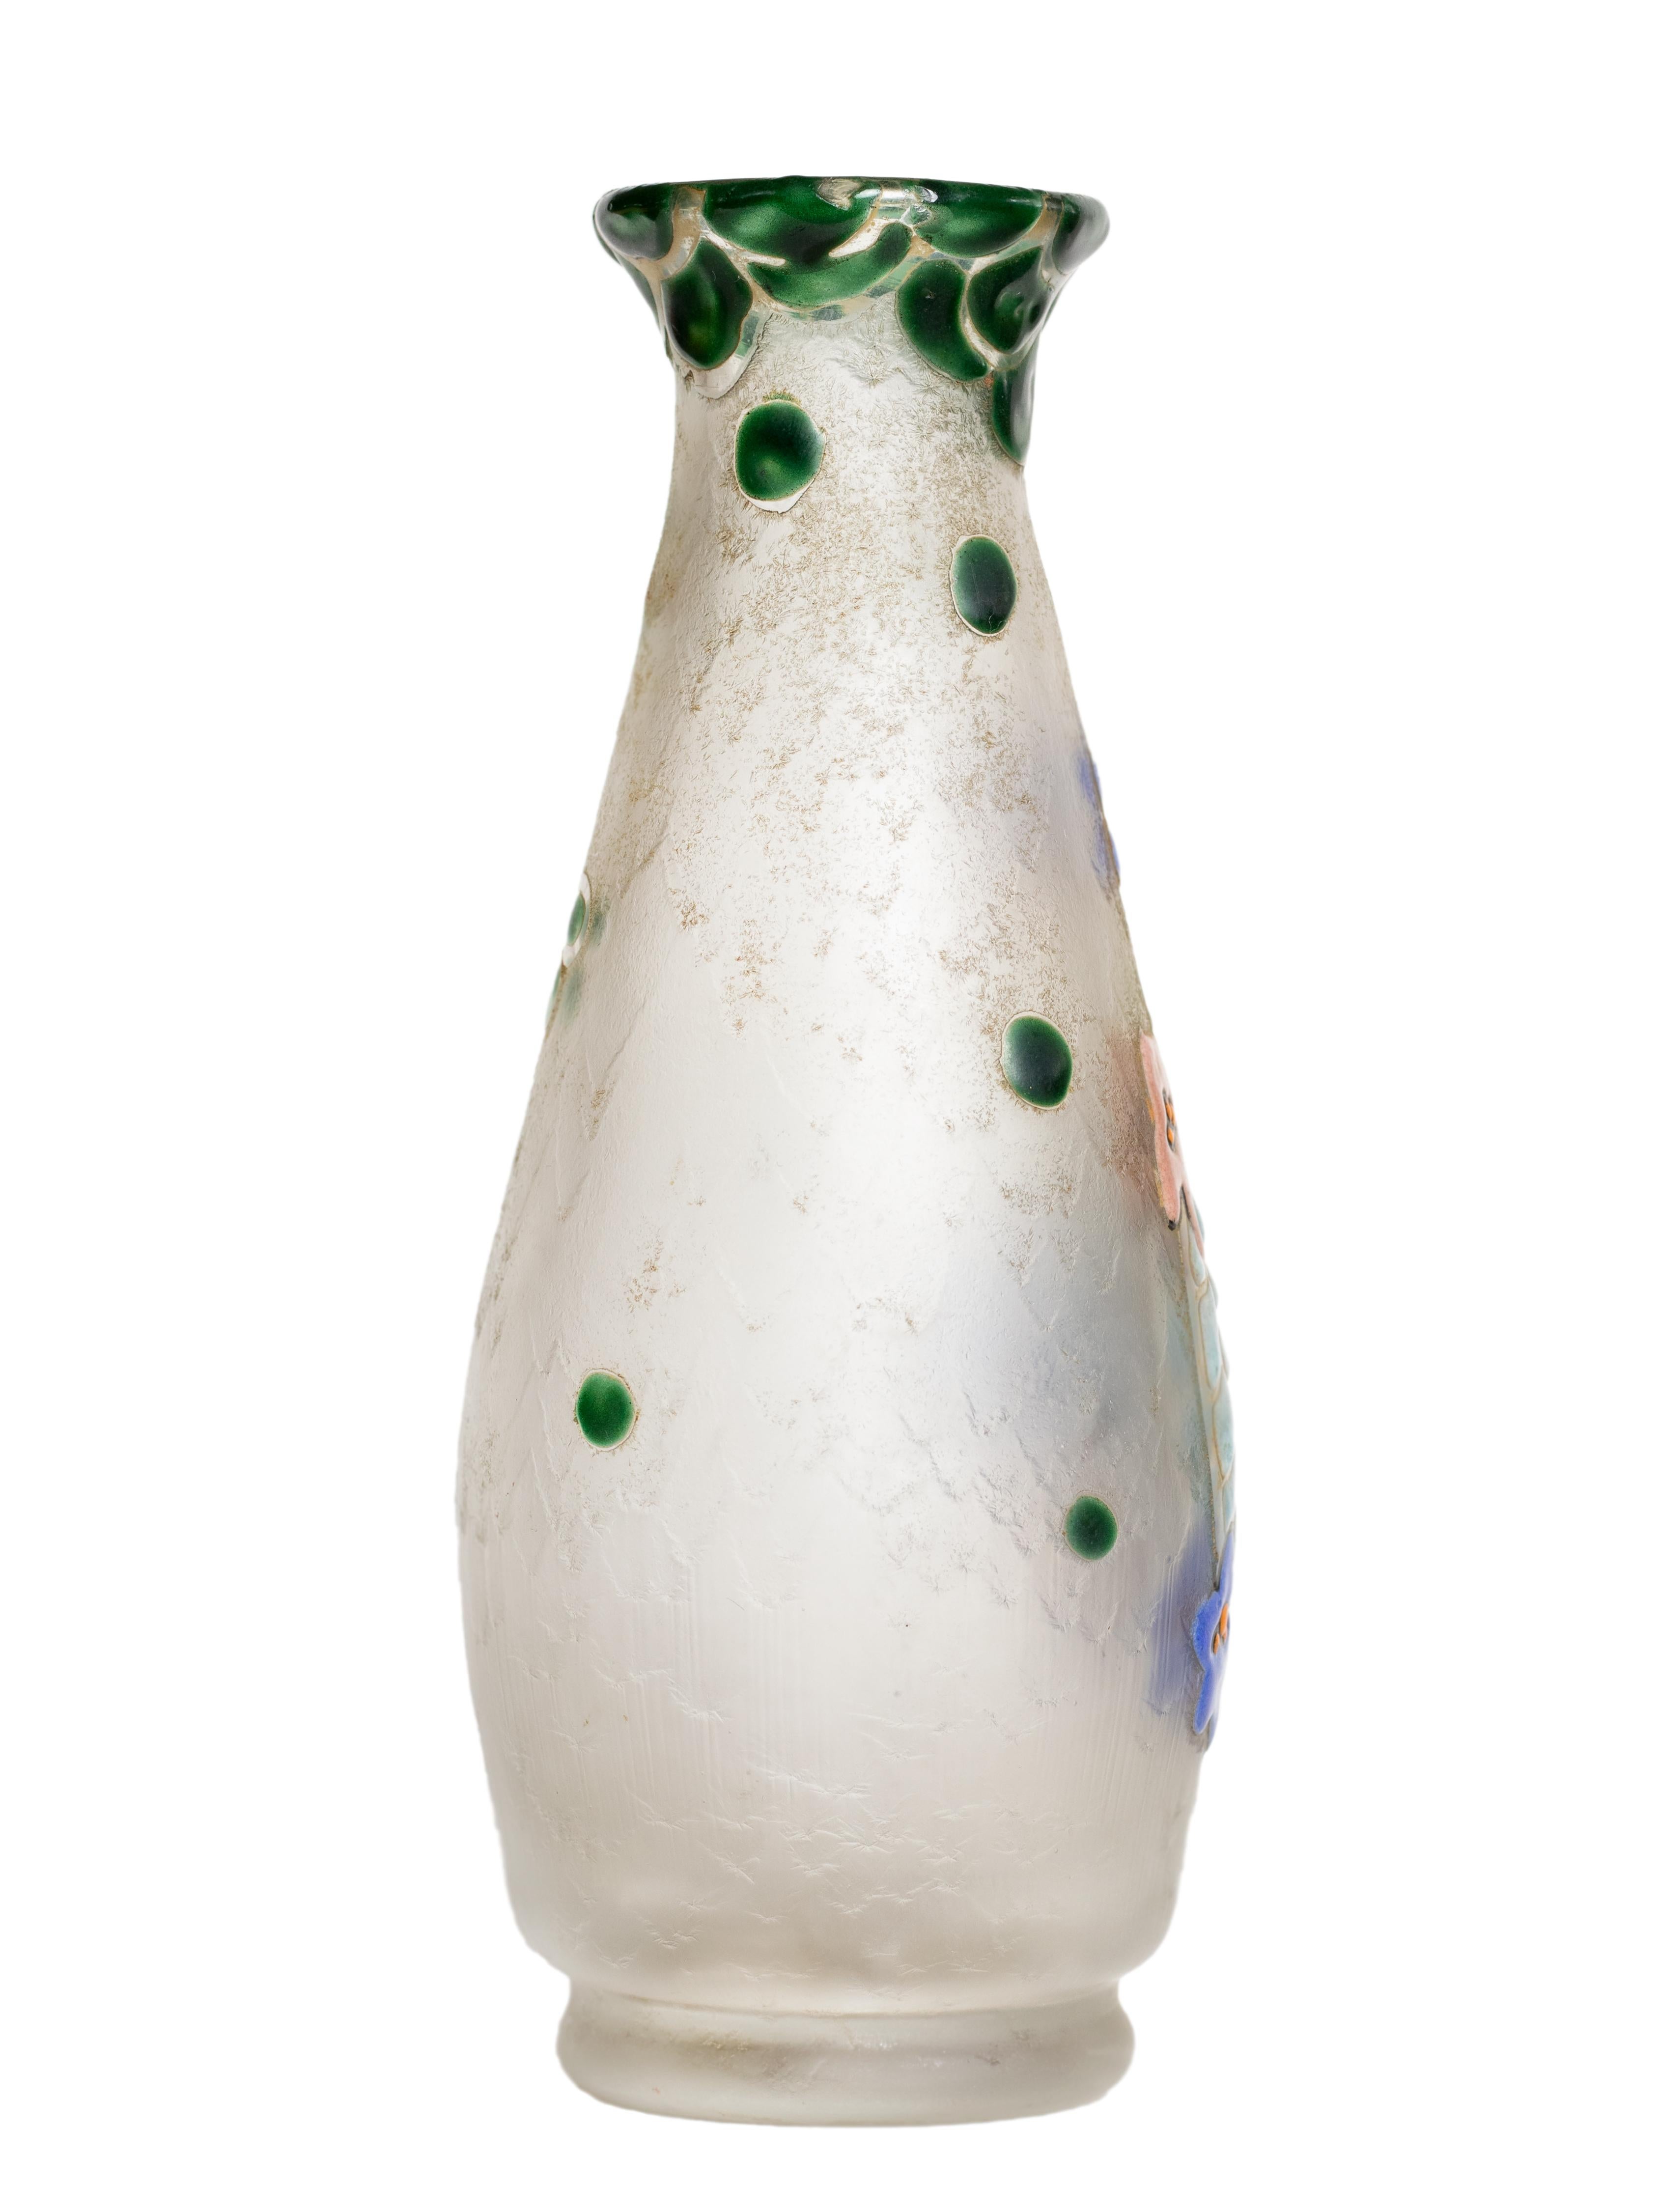 French  Legras Cameo Glass Vase by François-Théodore Legras, 20th Century For Sale